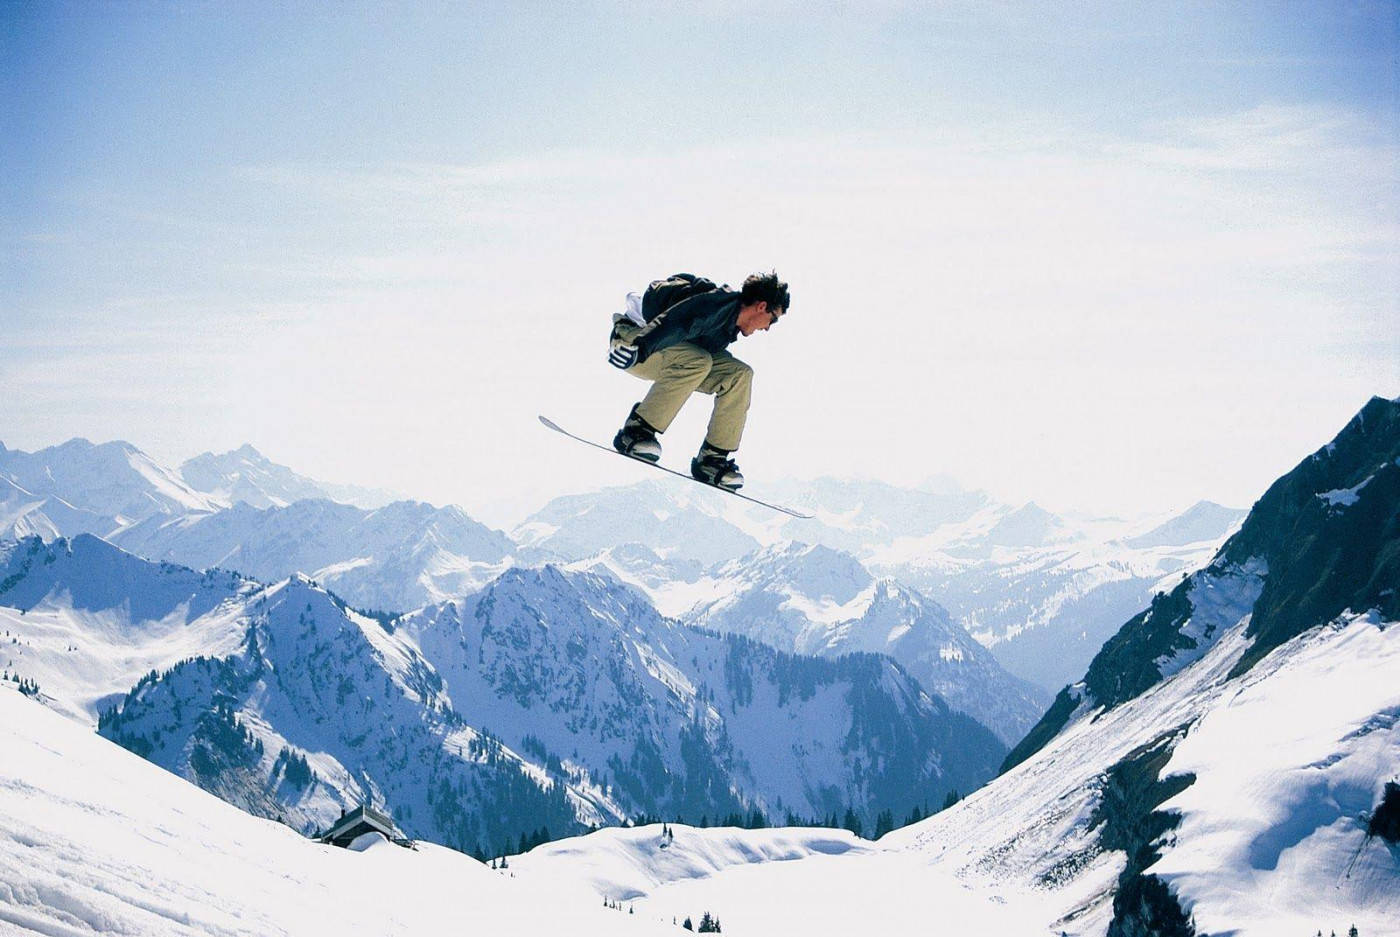 Man With Snowboard Descending With Mountainous Backdrop Wallpaper